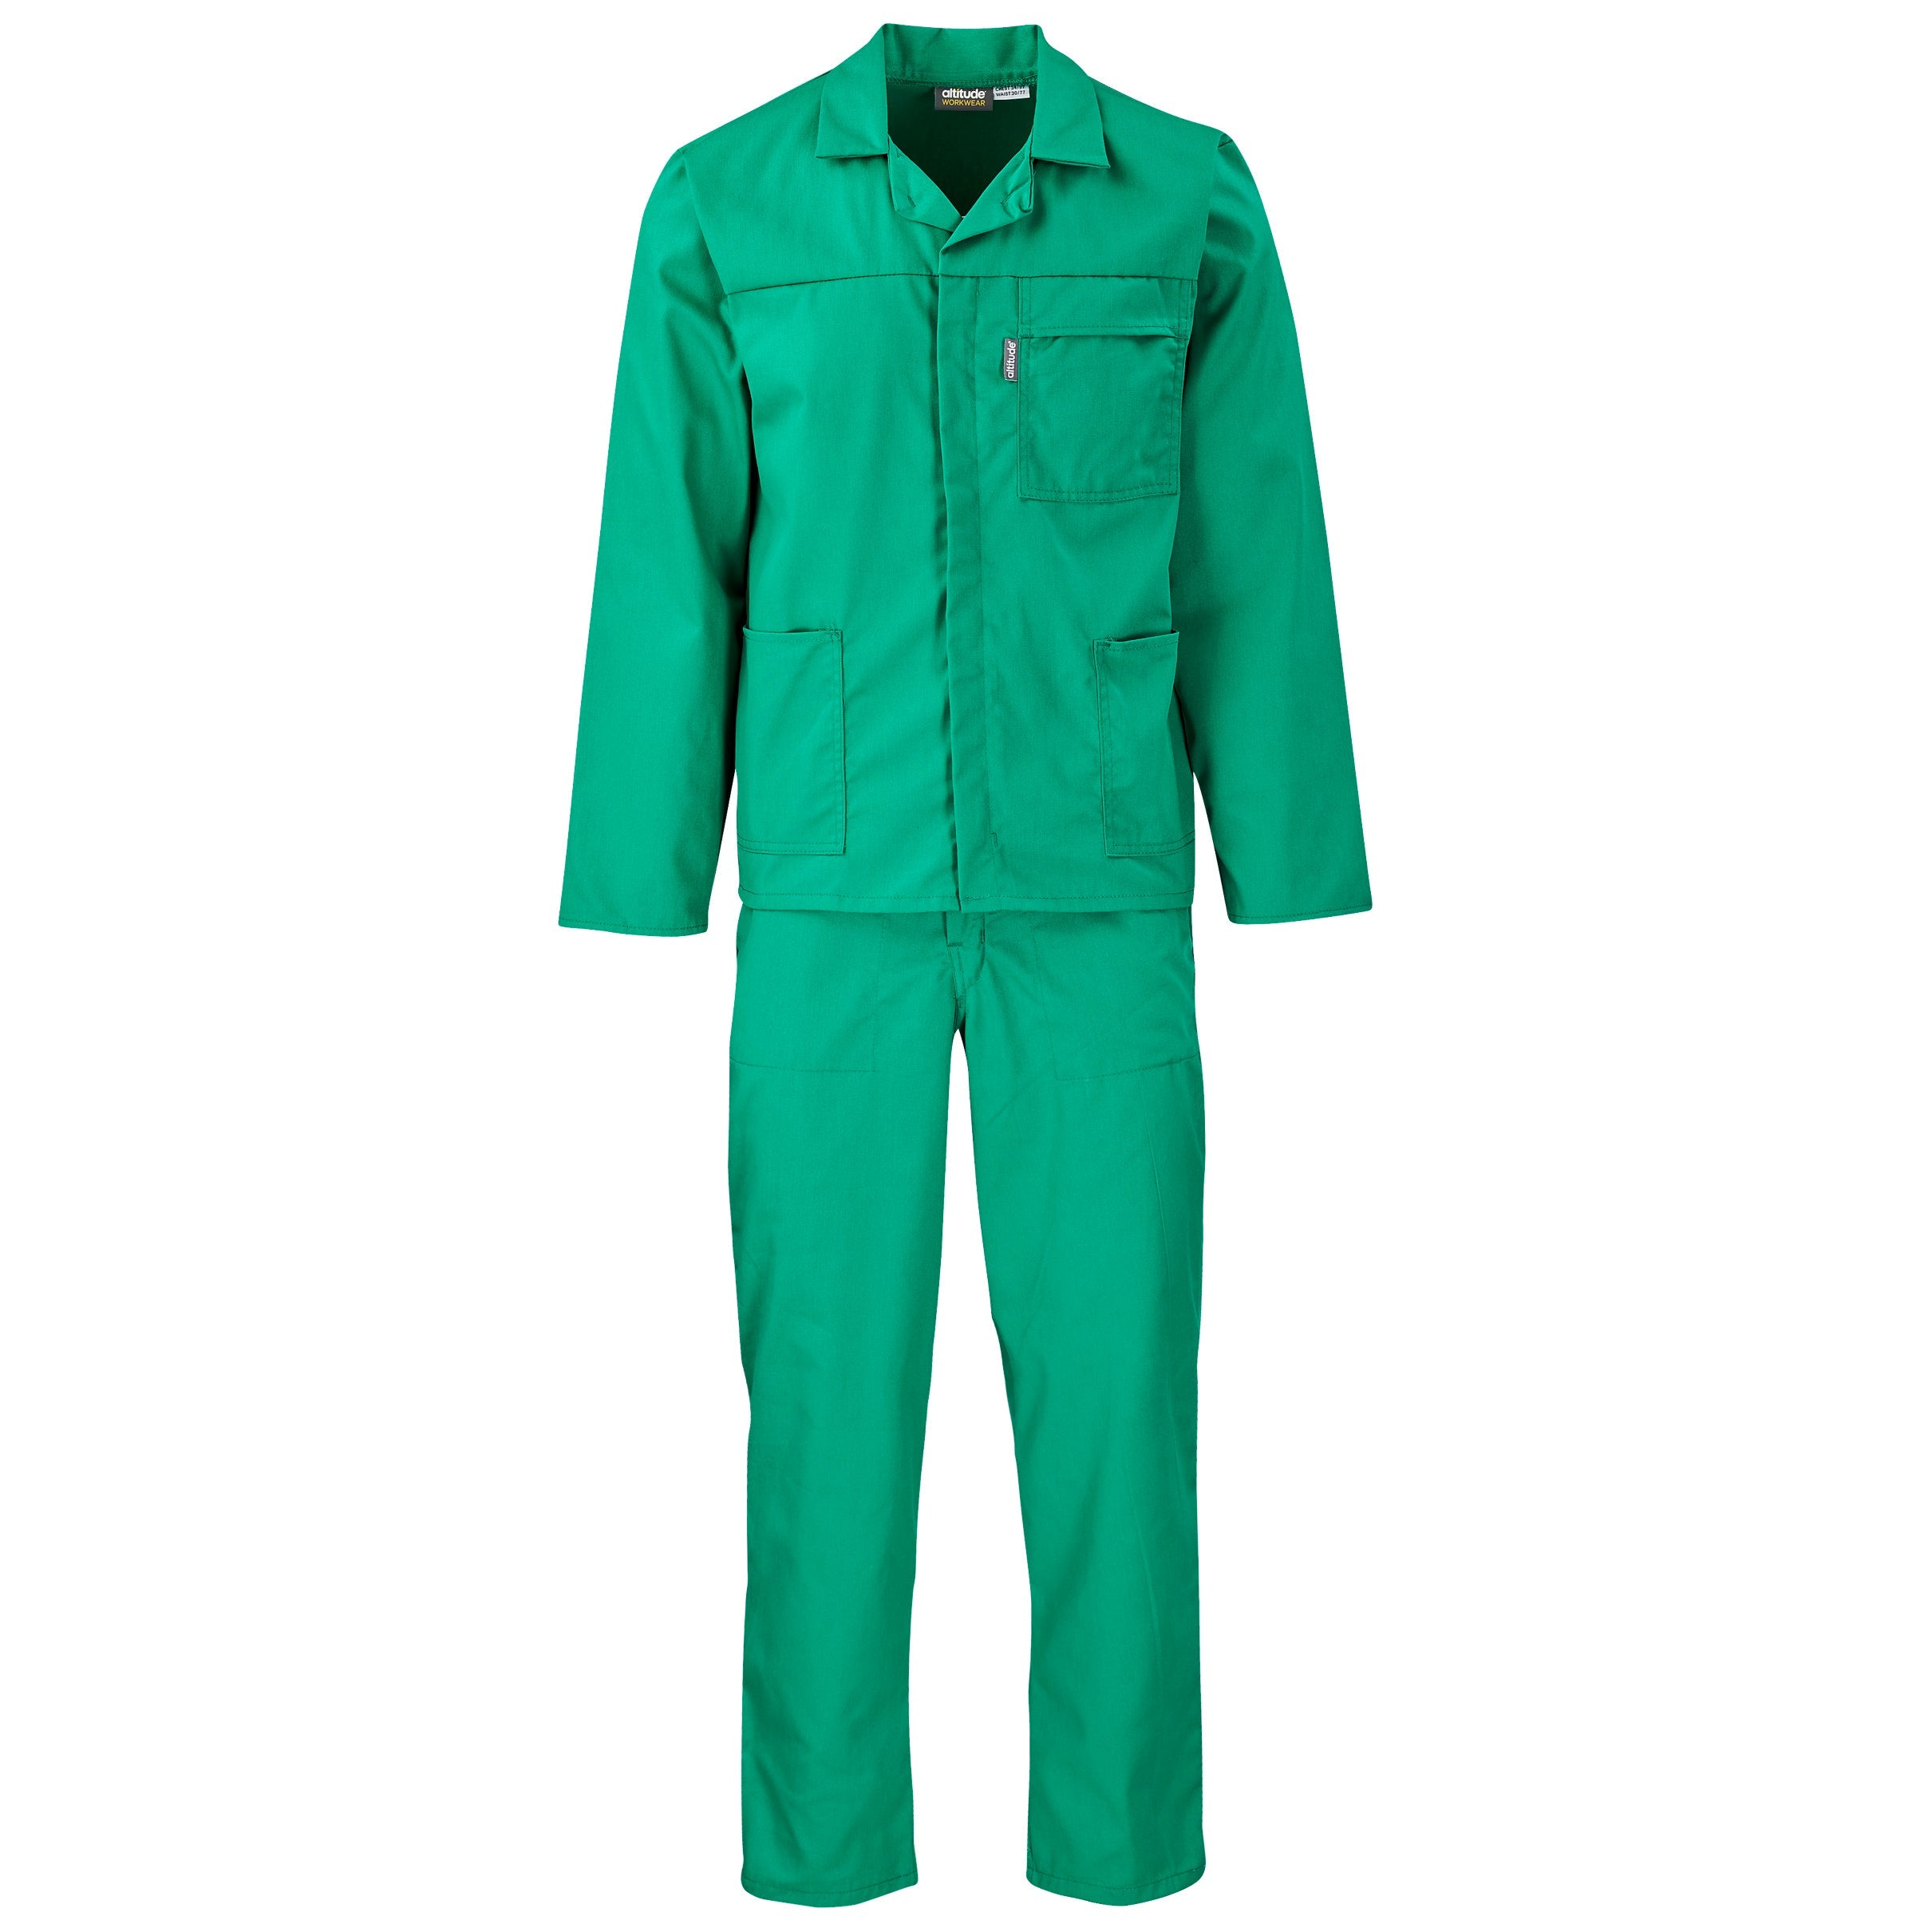 Trade Polycotton Conti Suit 32 / Green / G